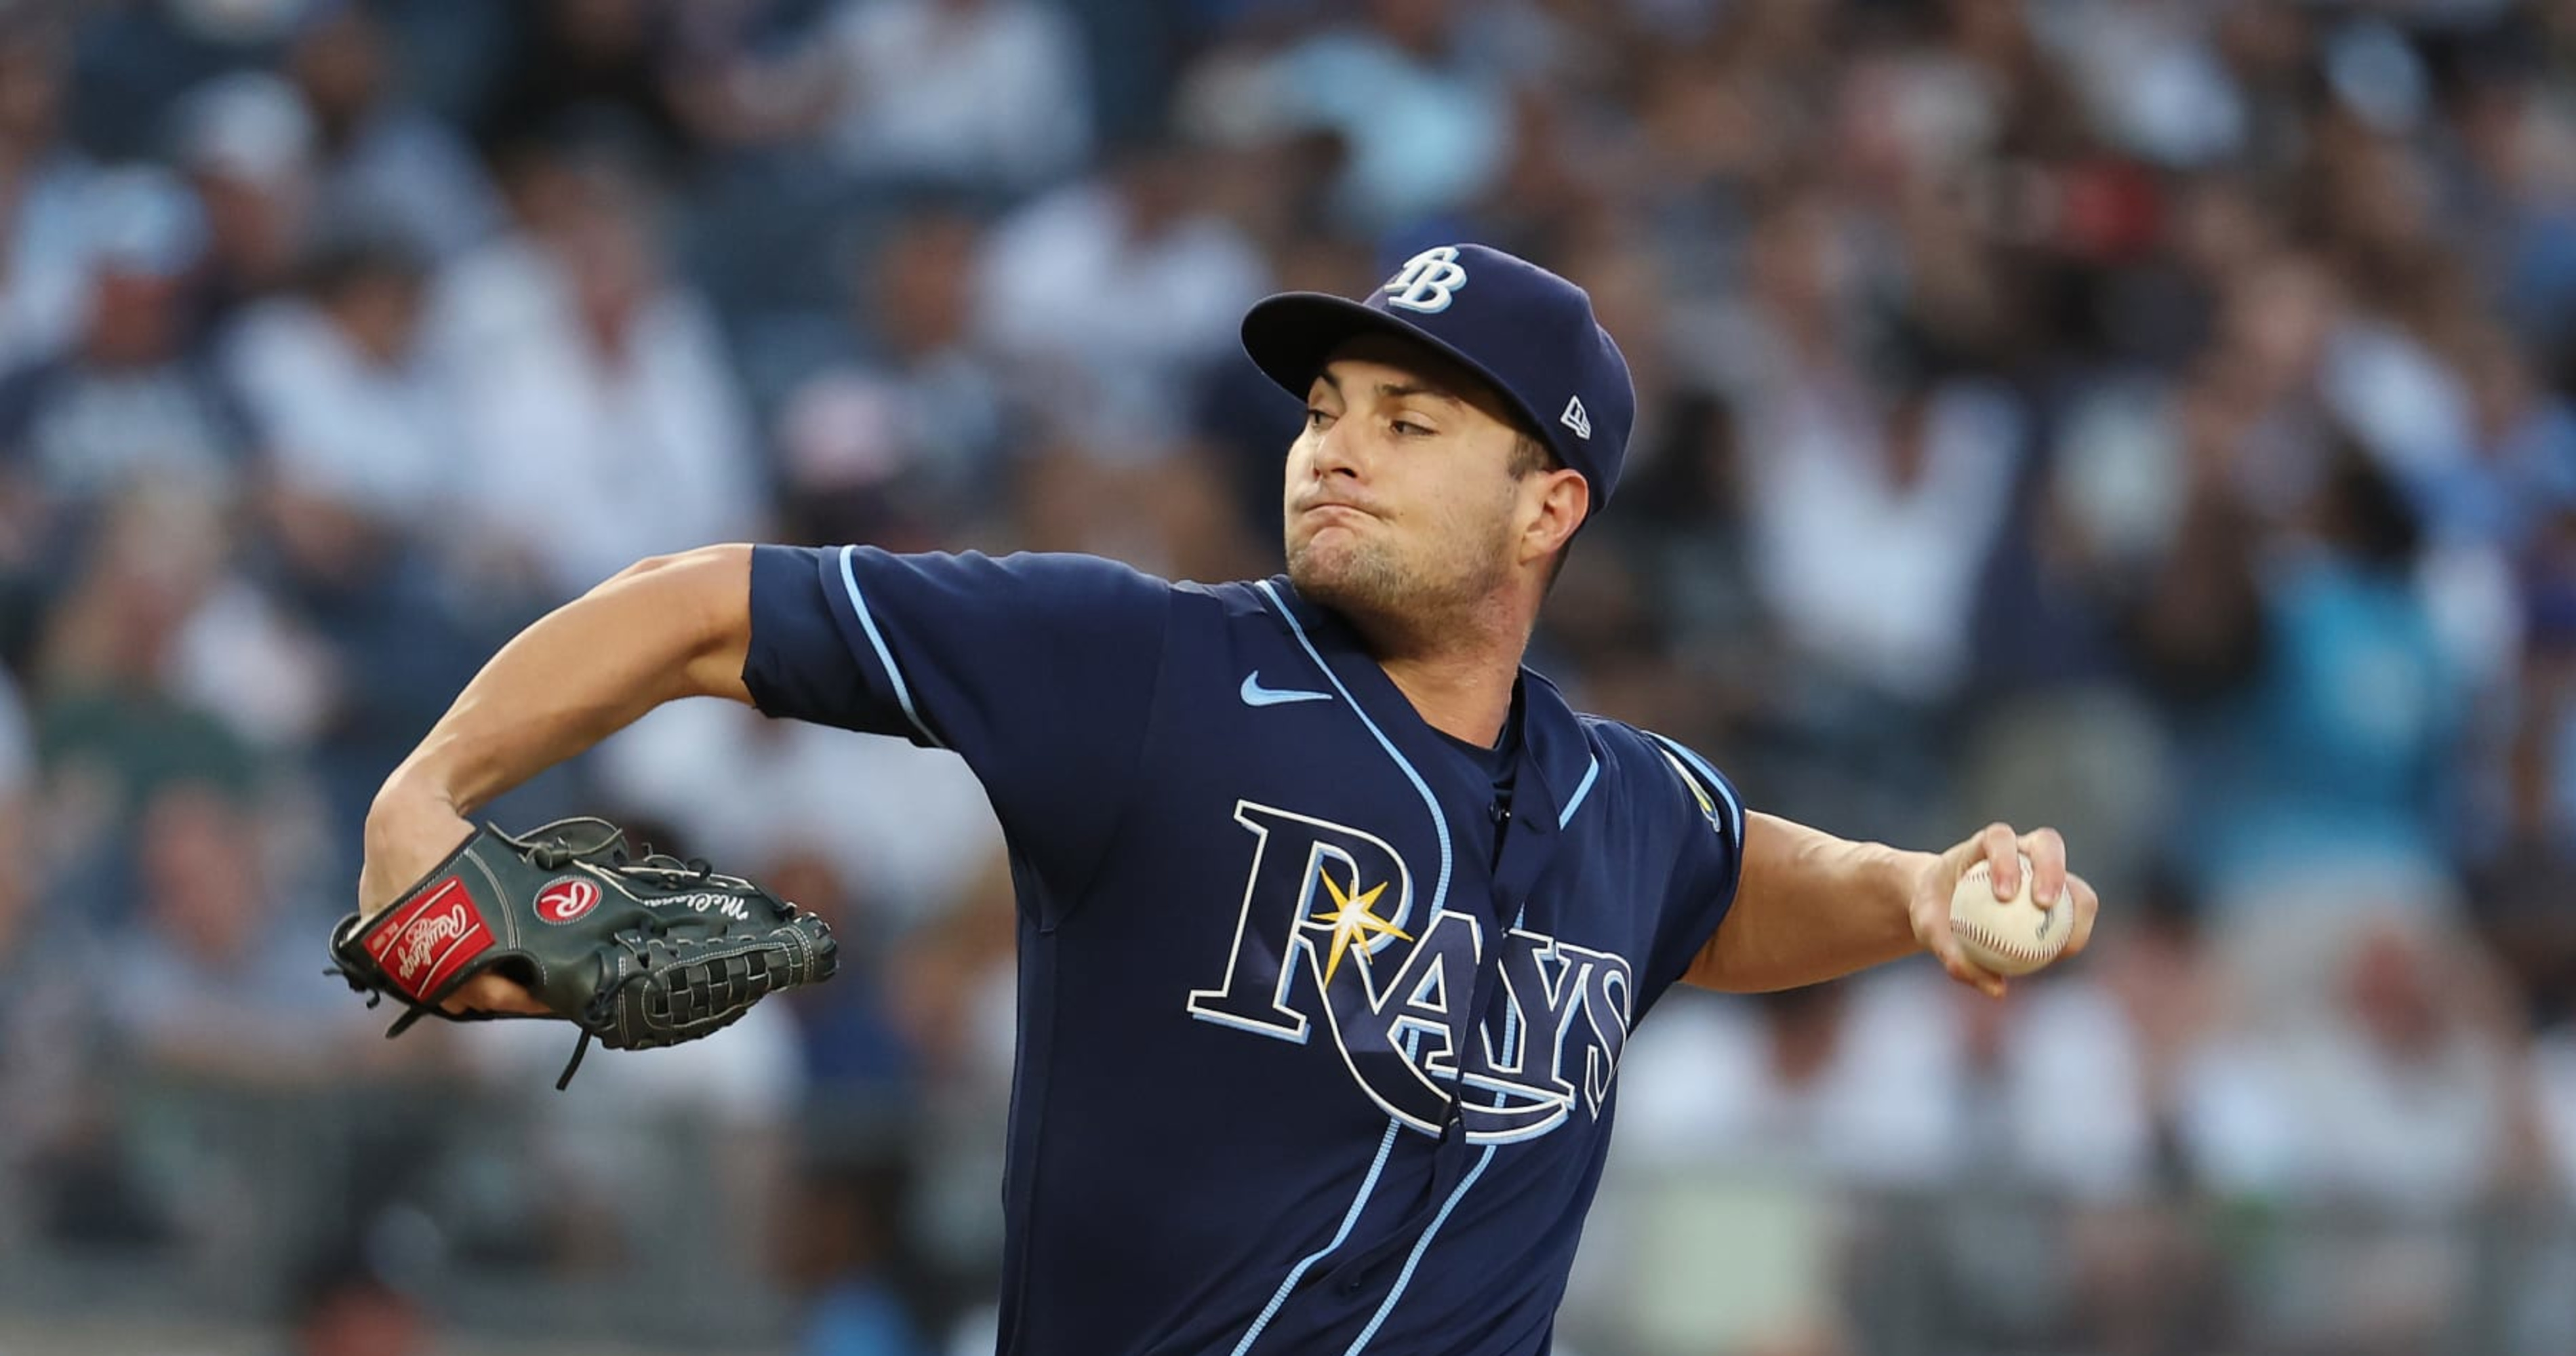 Rays manager: McClanahan unlikely to pitch again in 2023